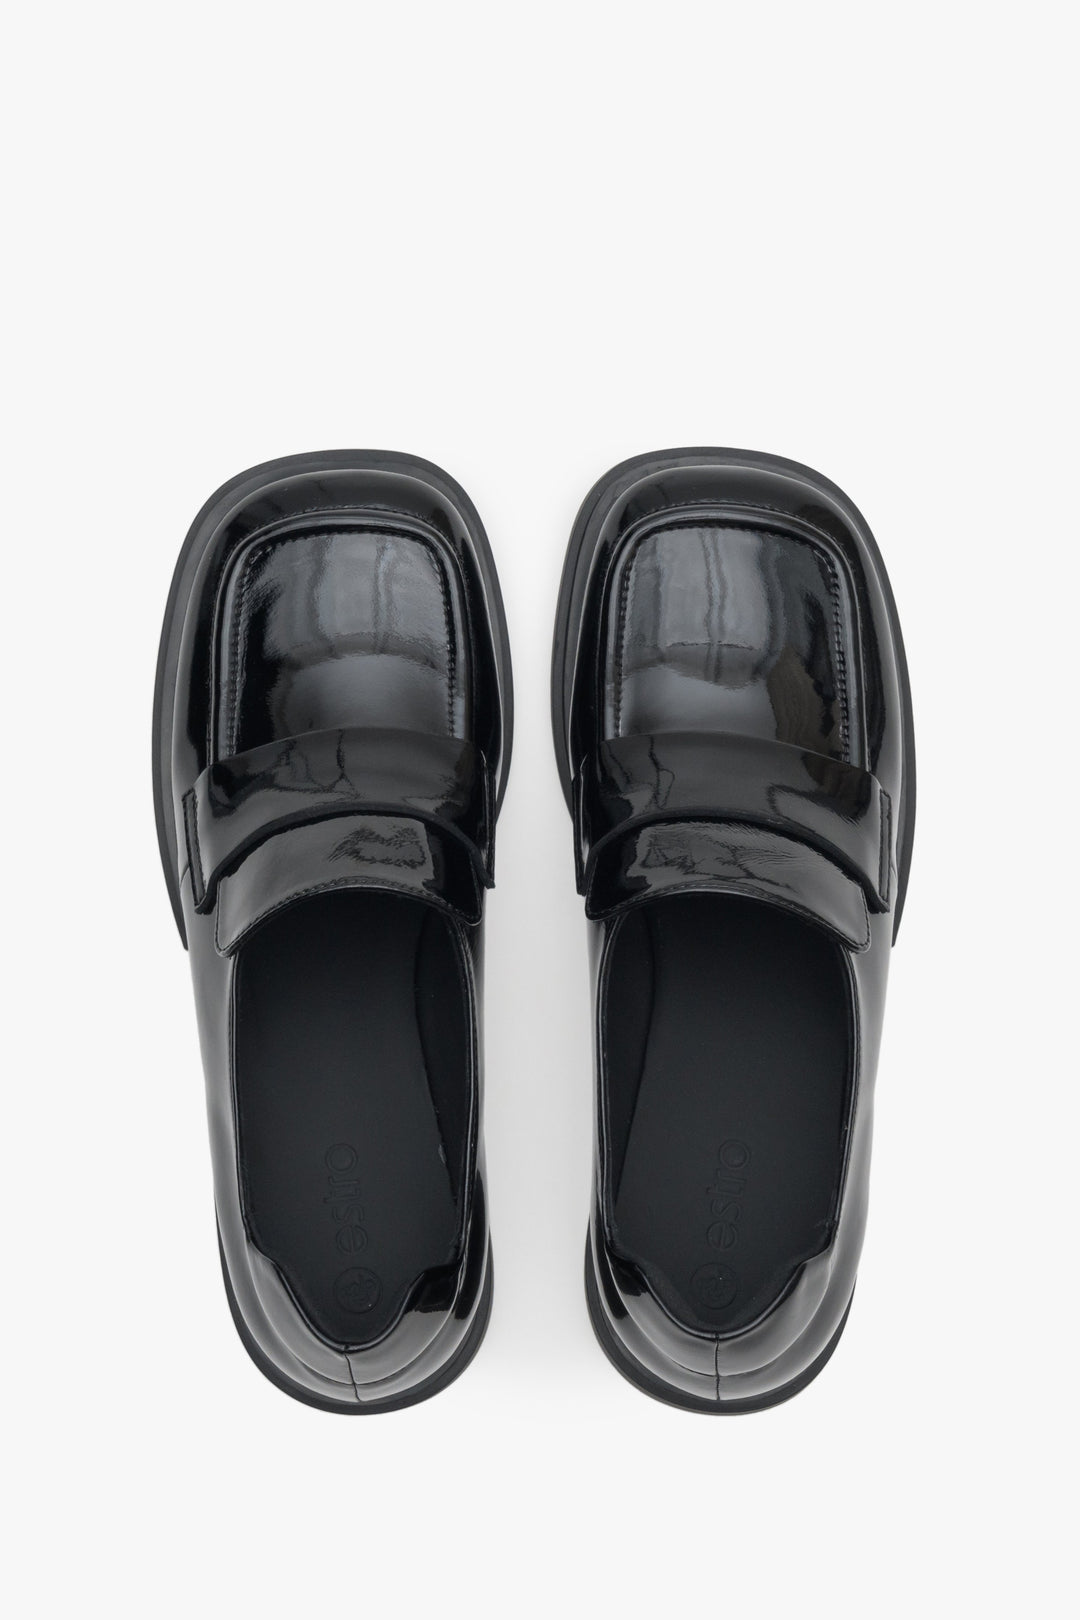 Women's leather, patent leather moccasins in black by Estro - top view presentation of the model.